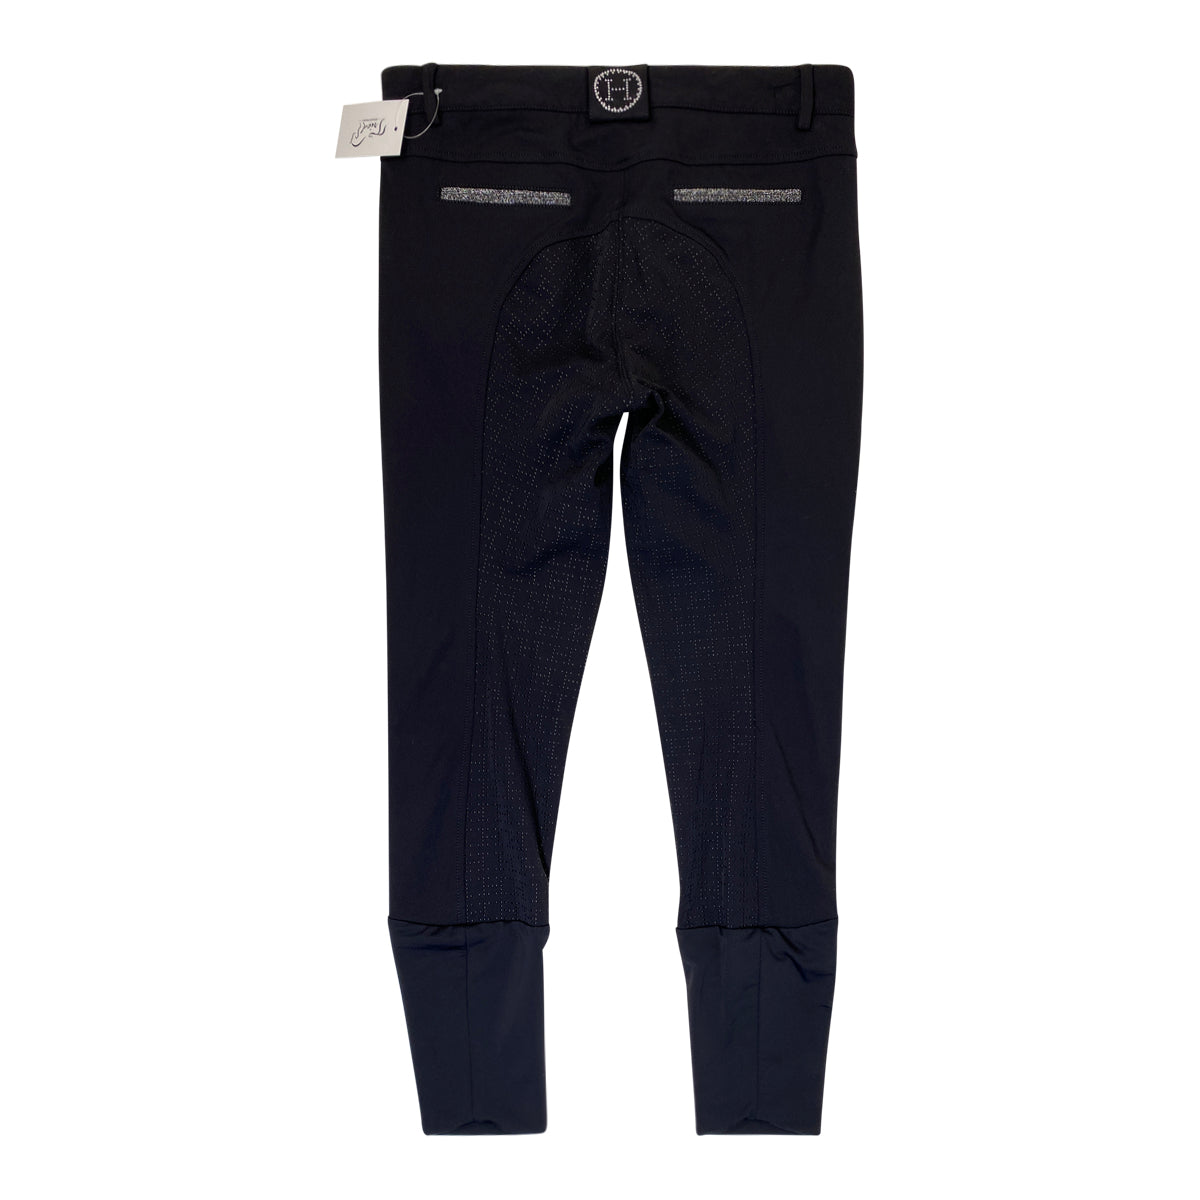 Harcour &#39;Boogie&#39; Full Seat Breeches in Black/Crystal